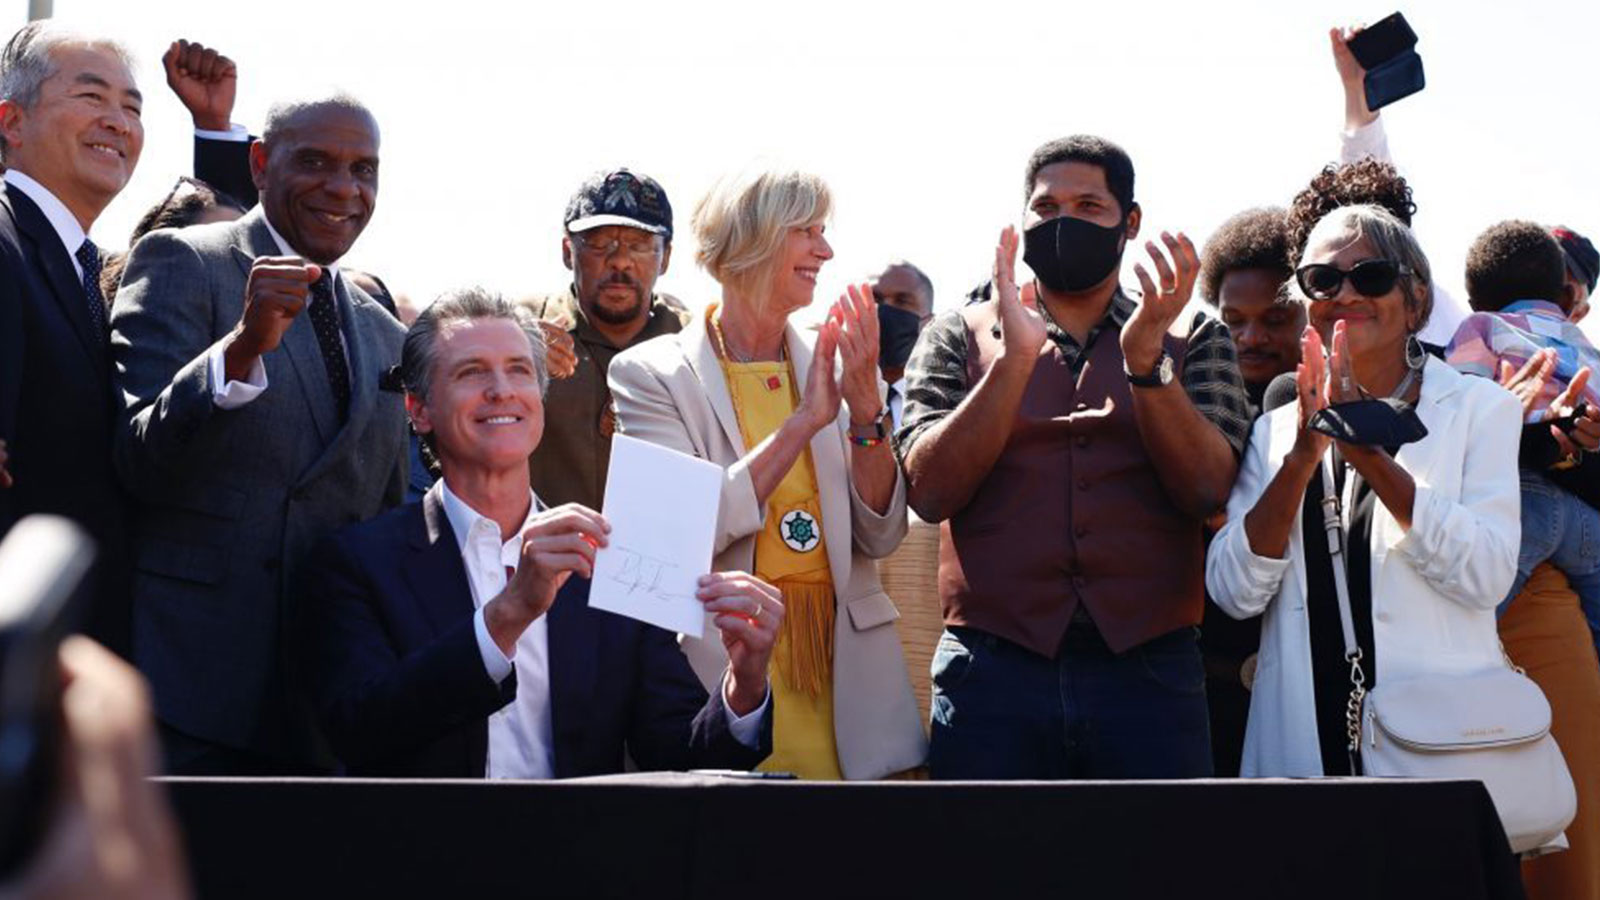 On September 30, 2021, Gov. Gavin Newsom signed a bill to return Manhattan Beach property known as Bruce’s Beach in Los Angeles to the family’s descendants.